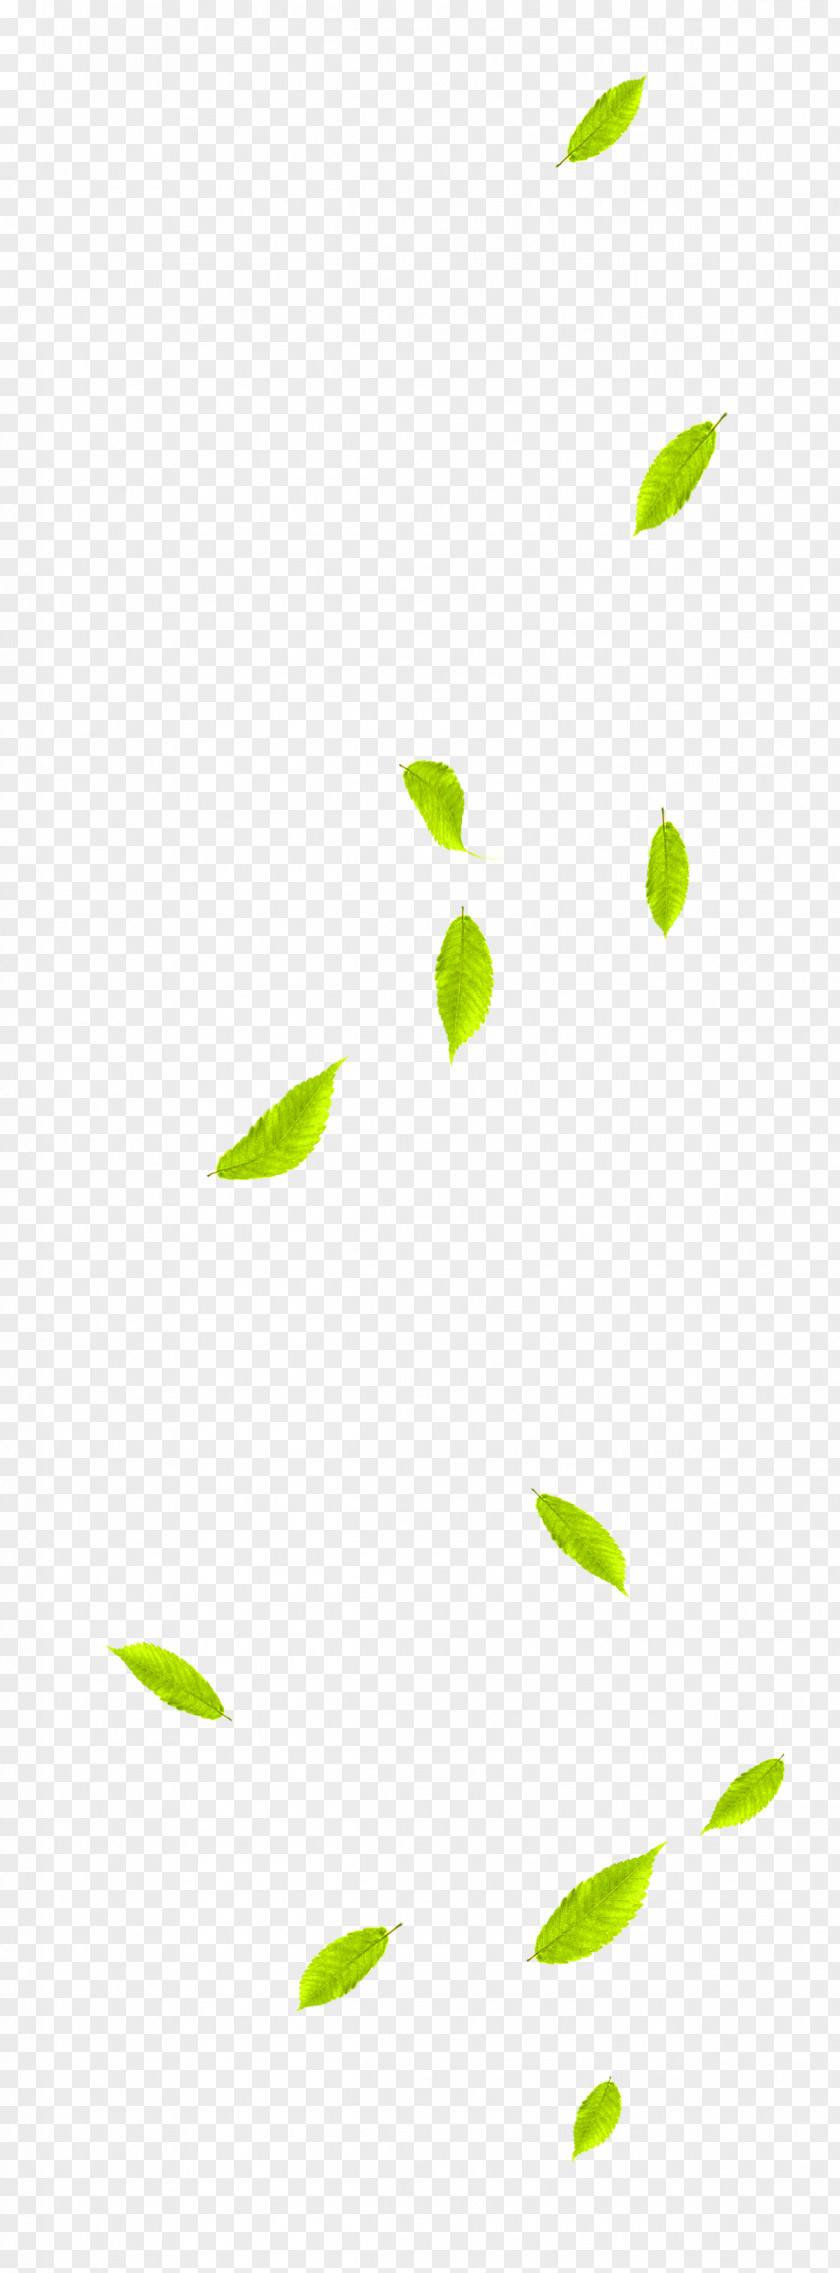 Green And Fresh Leaves Floating Material Leaf PNG